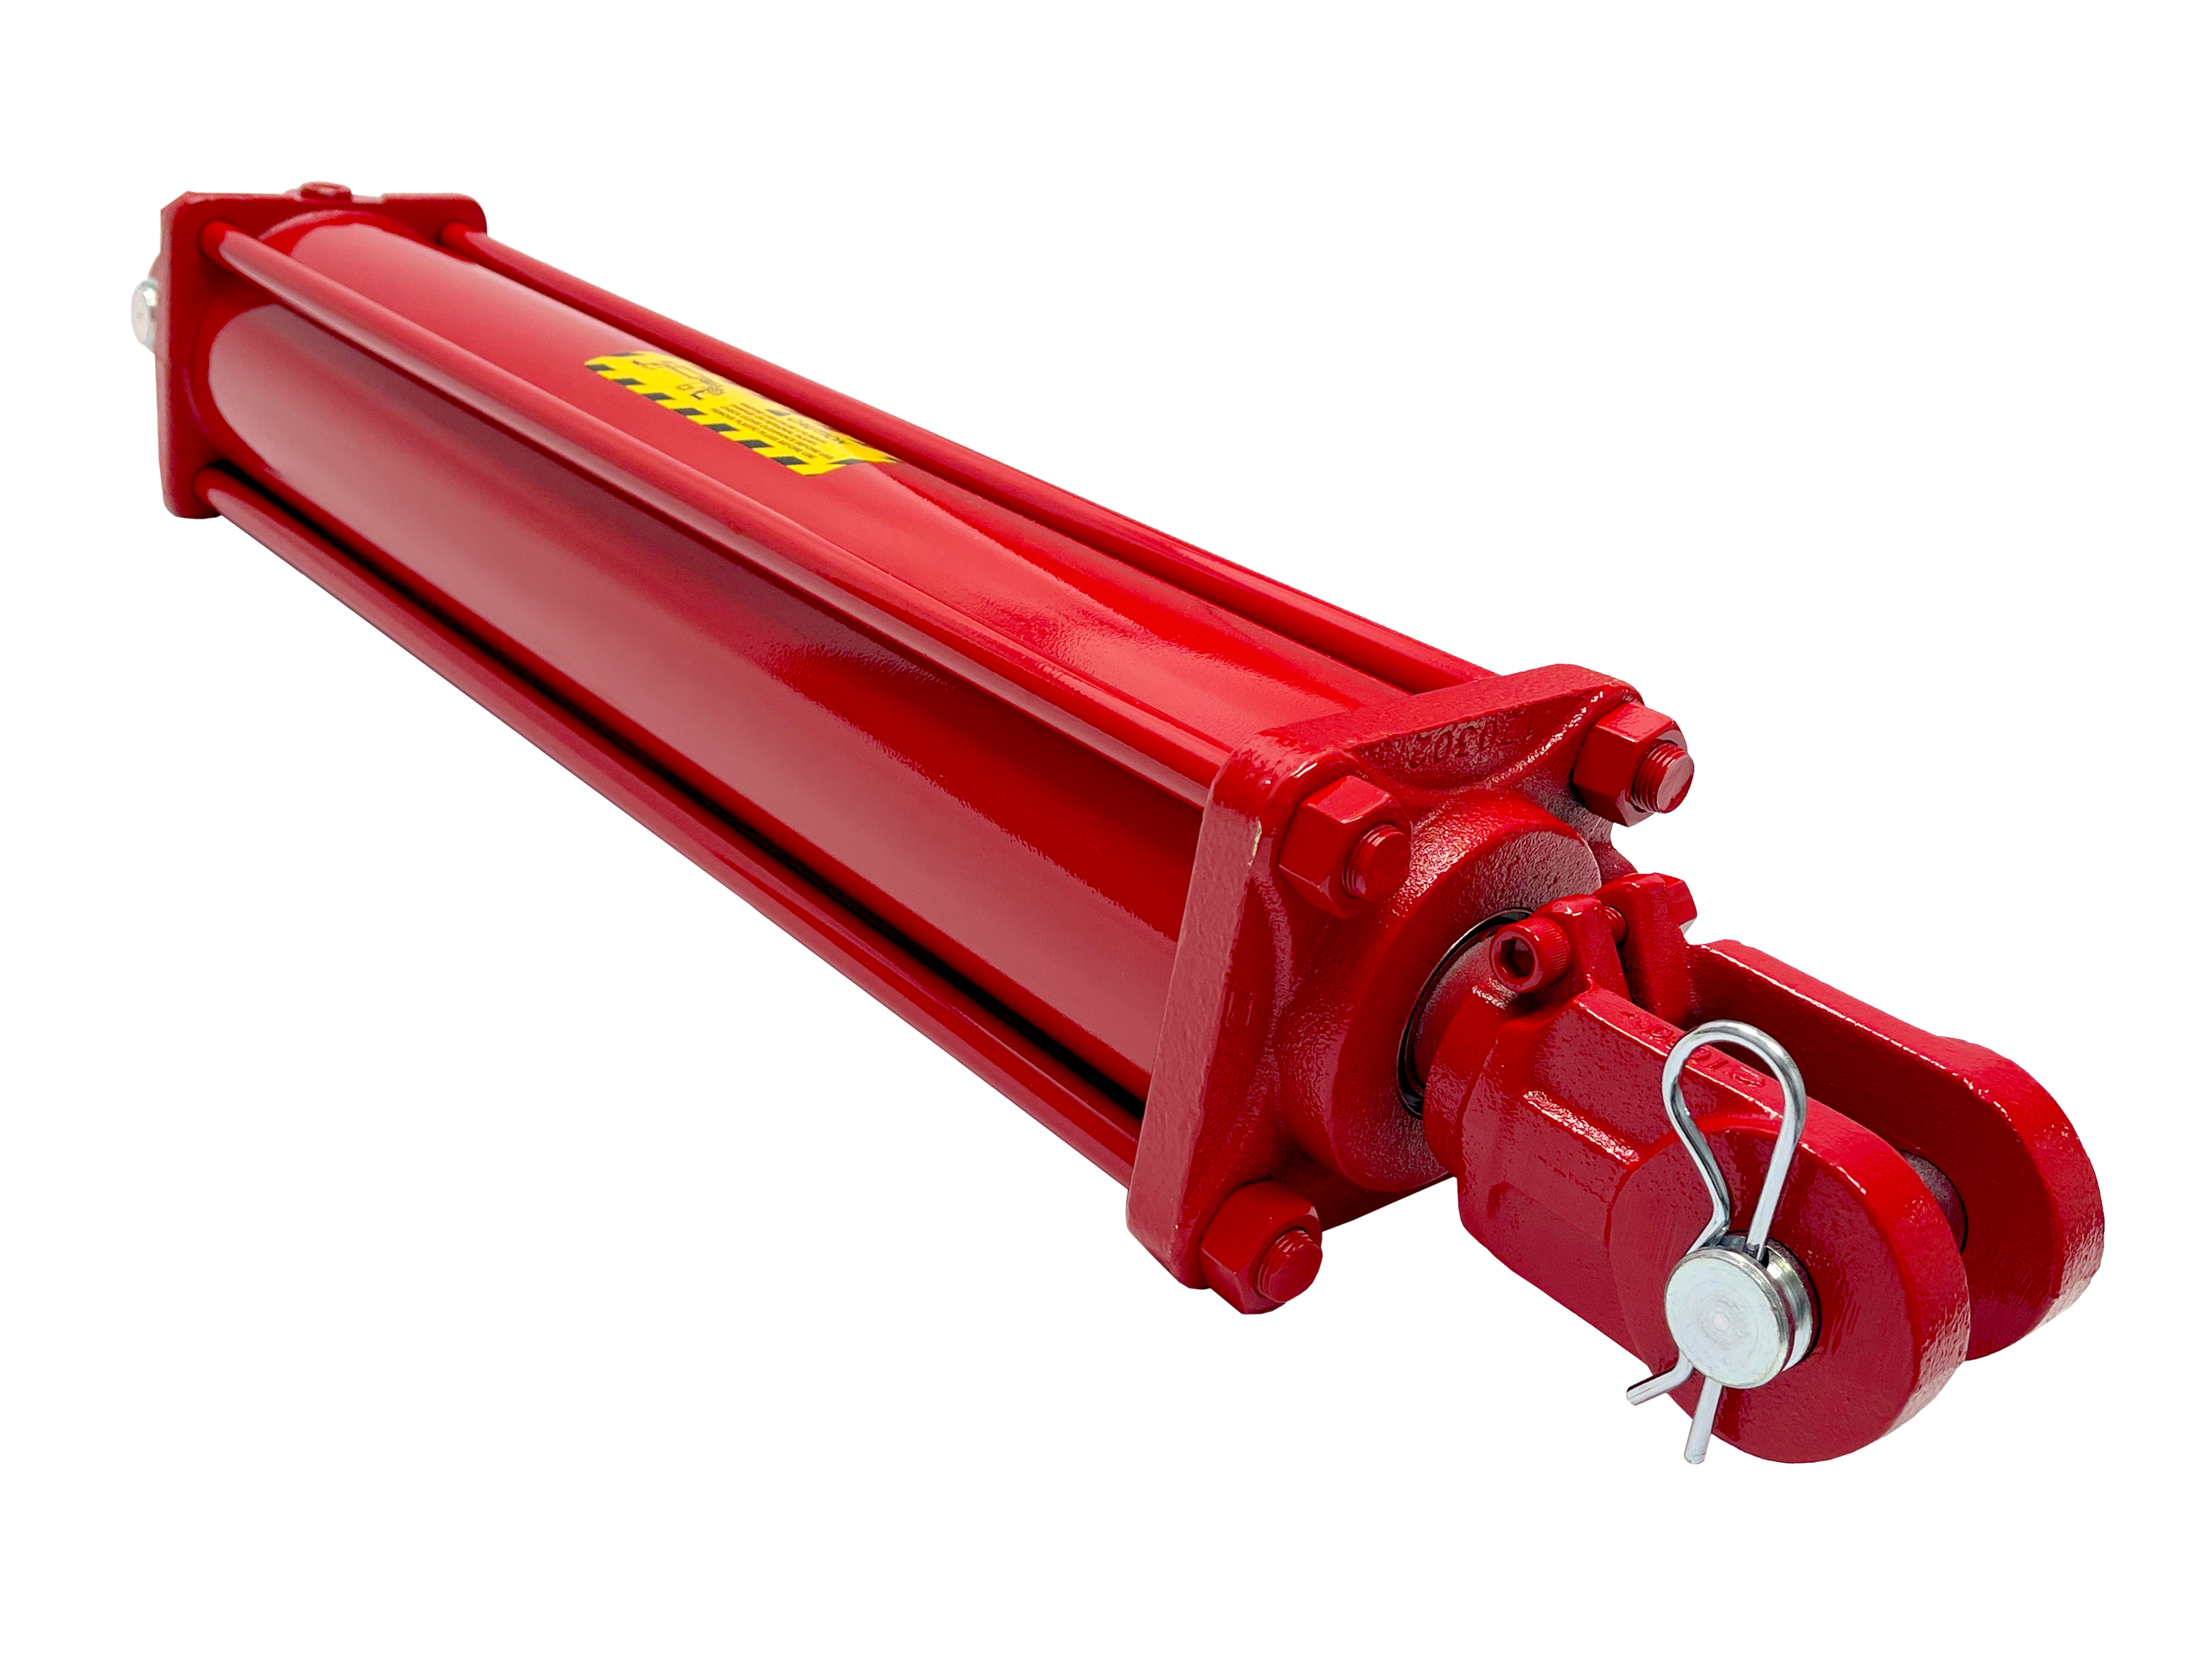 4 bore x 48 stroke CROSS hydraulic cylinder, tie rod double acting cylinder DB series | CROSS MANUFACTURING